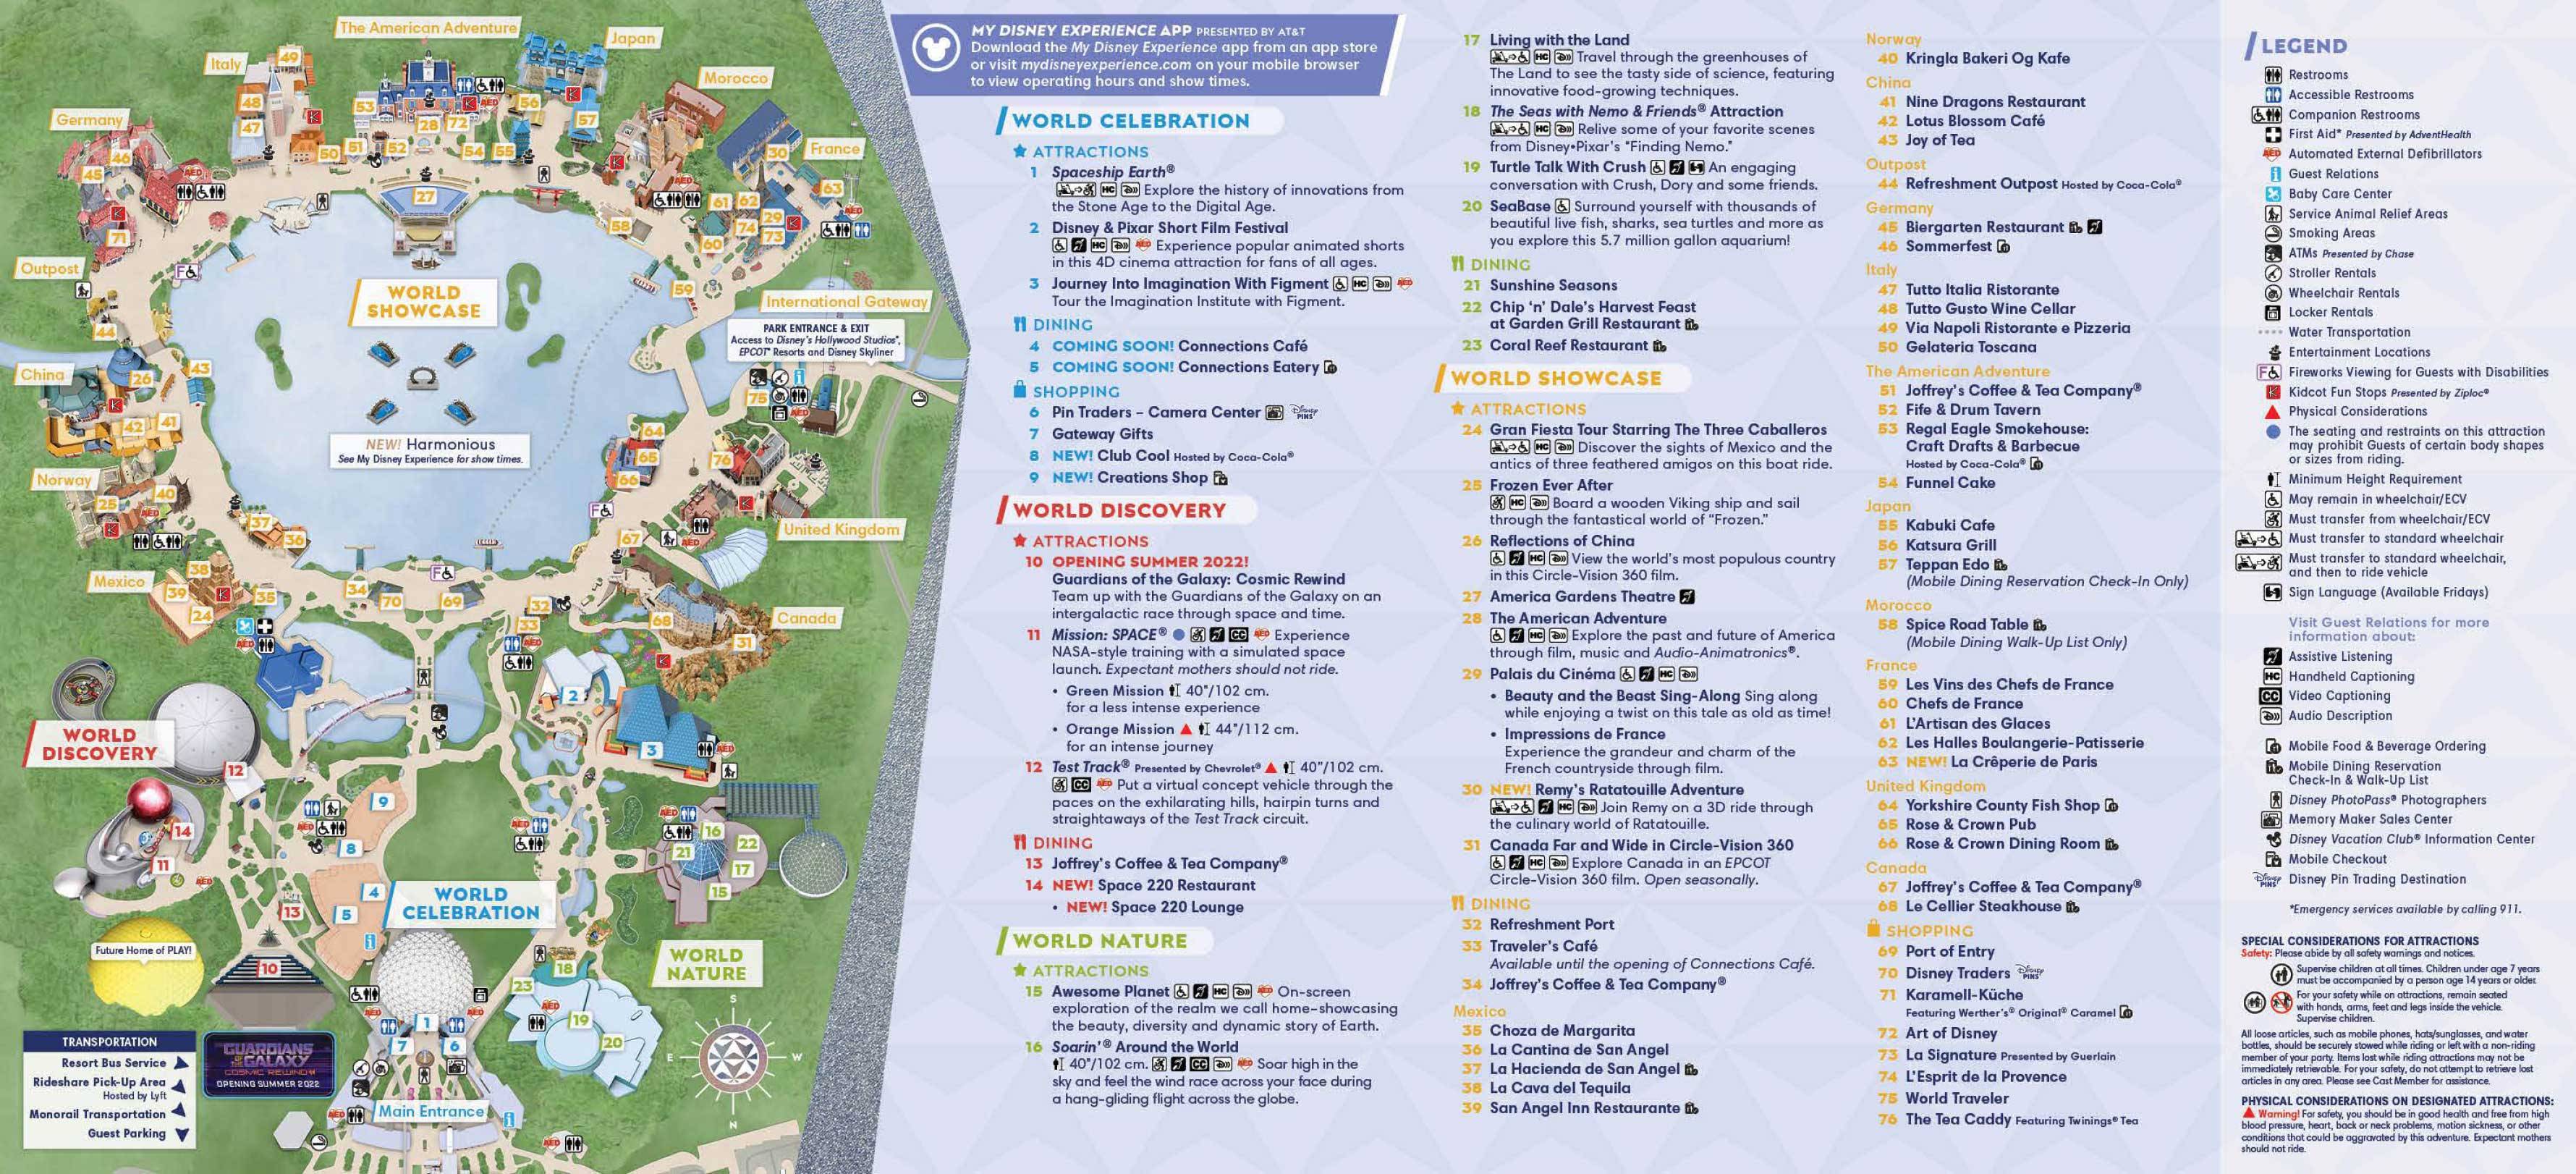 EPCOT guide map - March 2022 - Rear